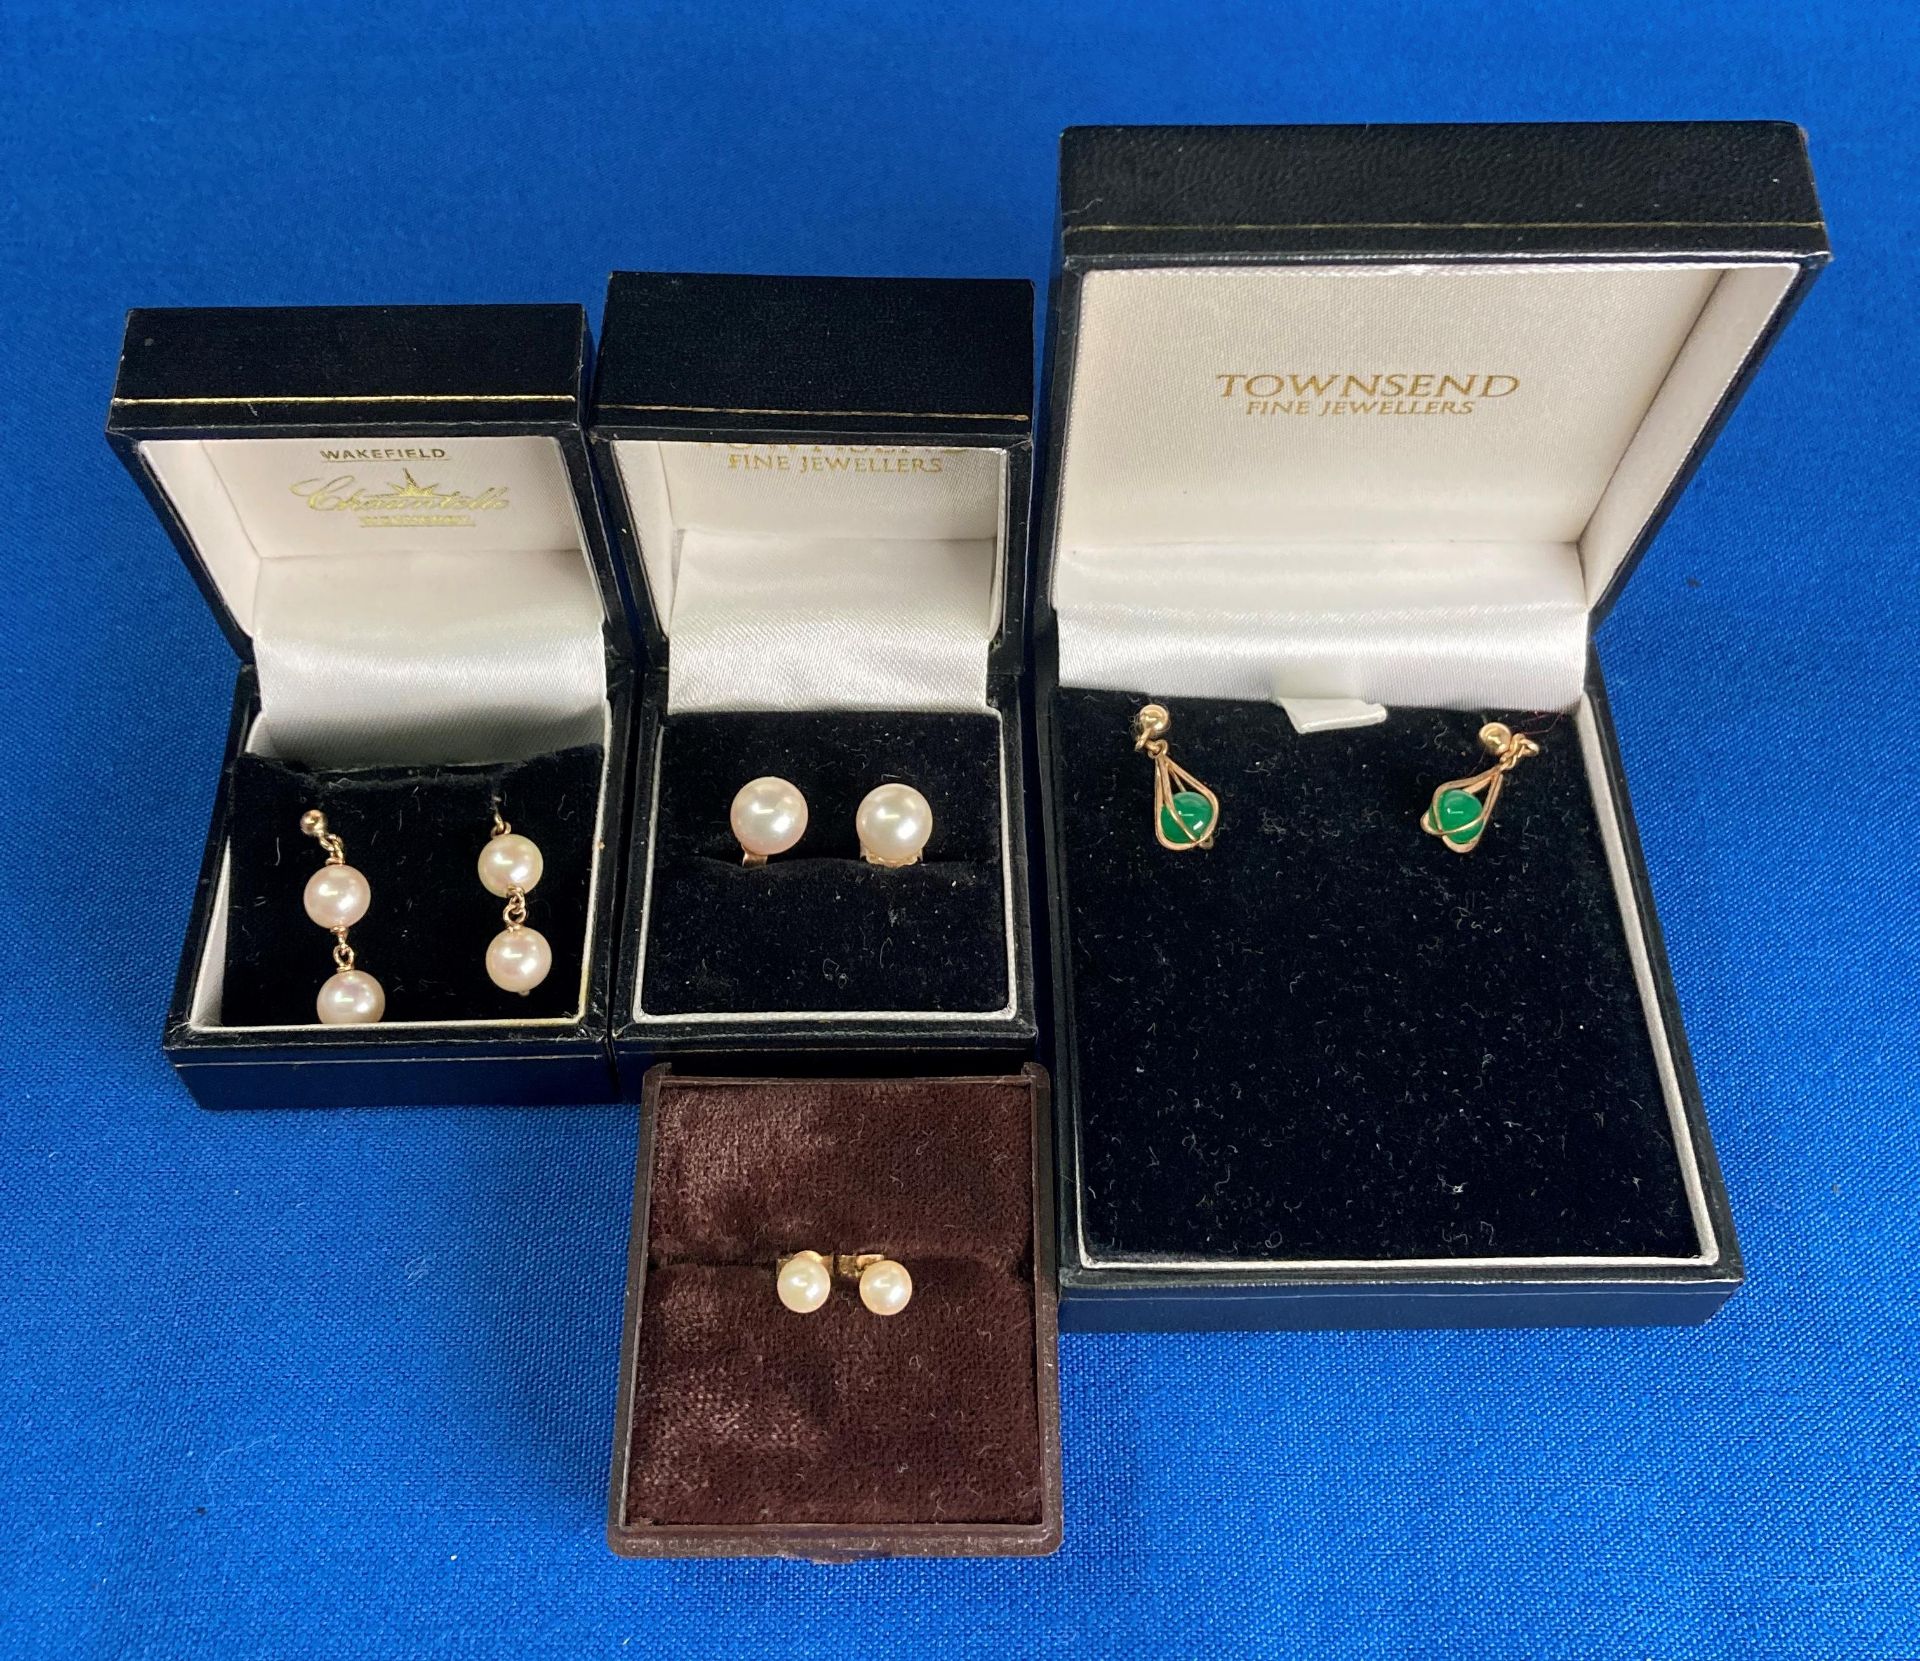 Four pairs of assorted 9ct gold earrings - three pairs decorated with pearls and one pair with a